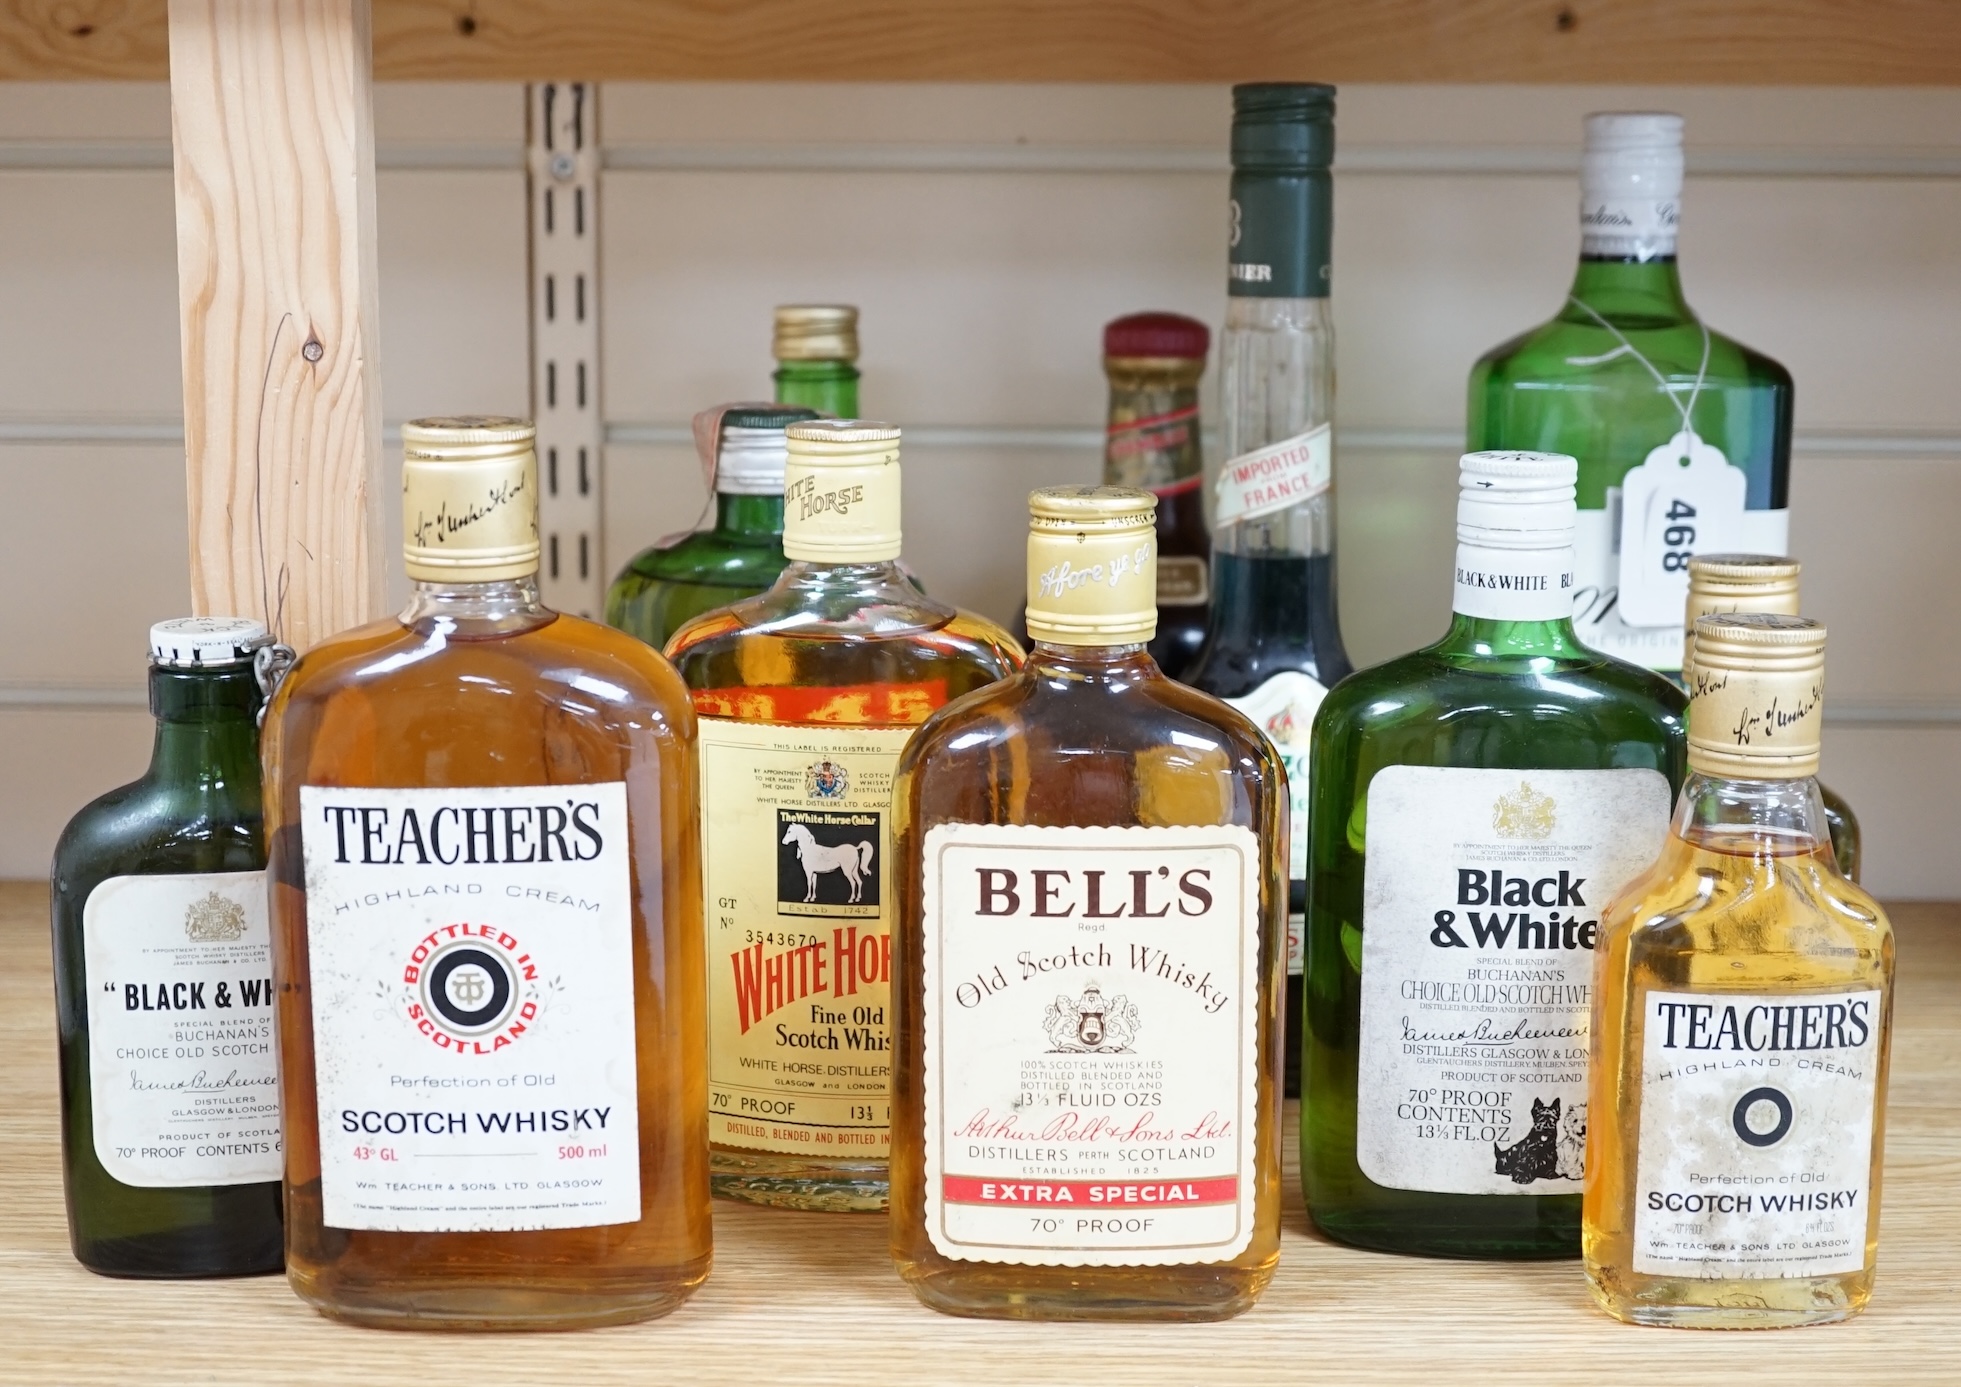 Twelve bottles of spirits to include seven bottles of whisky (Teachers, Bells, White Horse etc.) Condition - fair, storage history unknown